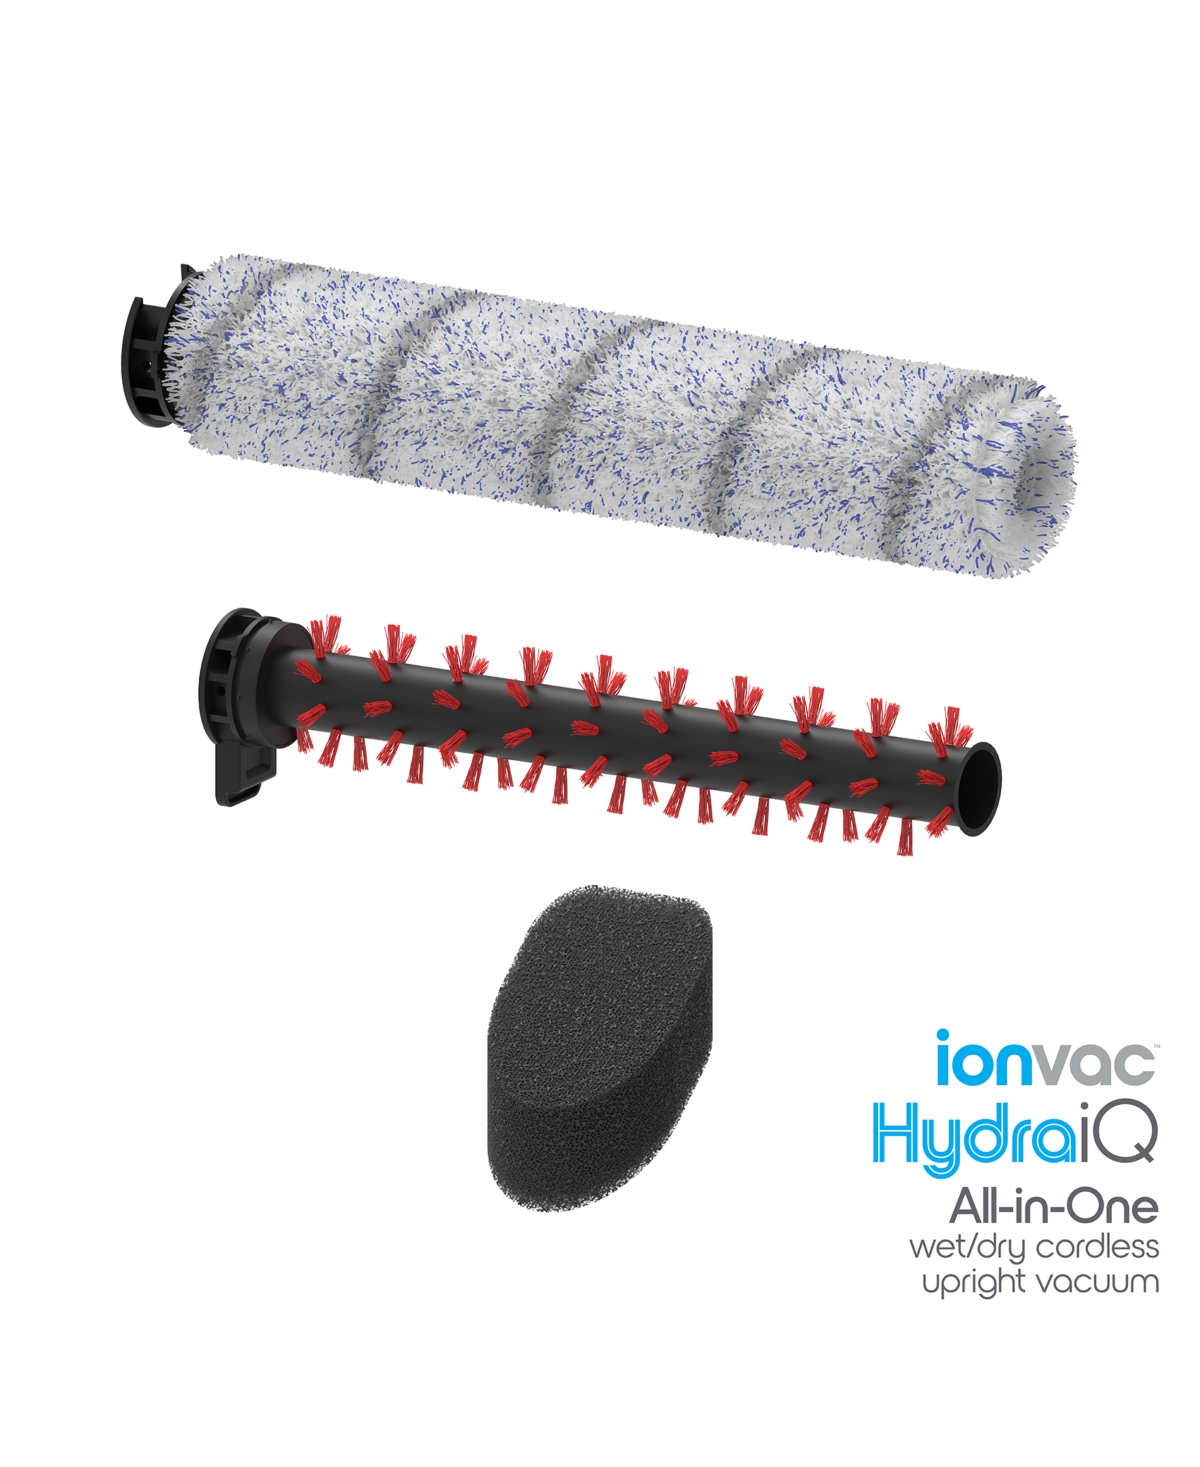 Tzumi Ionvac Hydraiq Vacuum Brush And Filter Replacement Kit In No Color